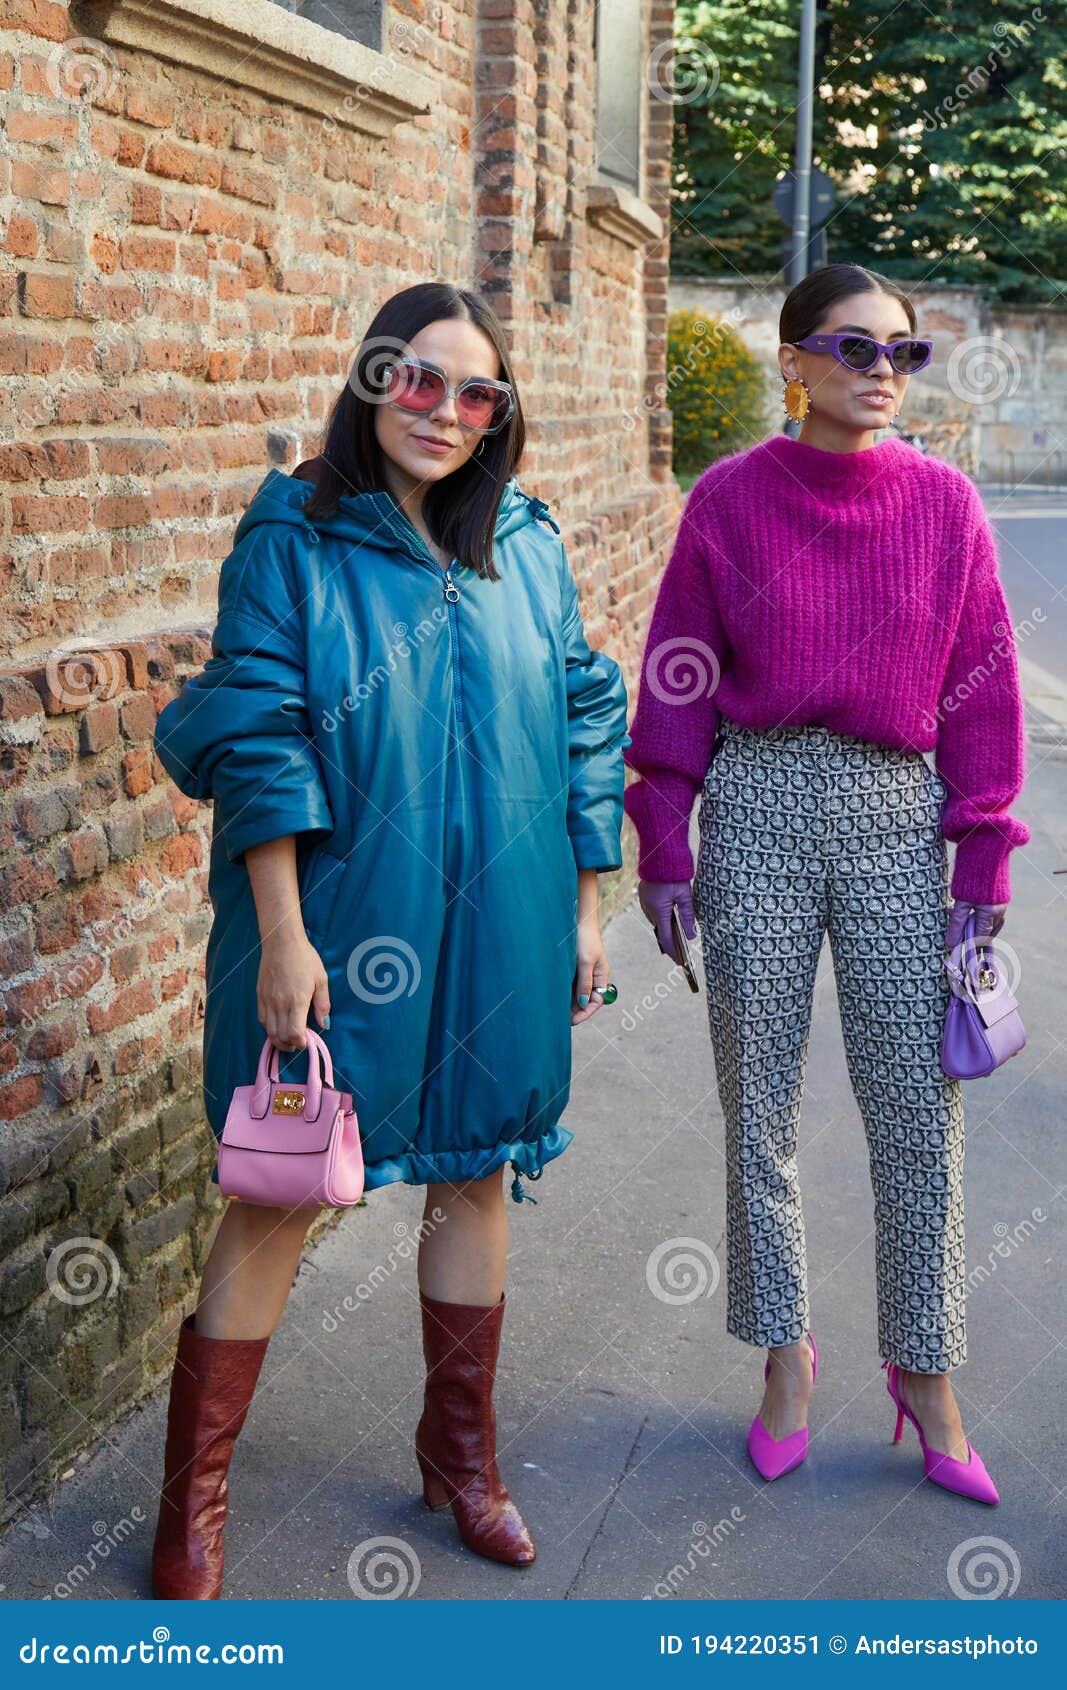 Women With Green Blue Jacket And Pink Sweater Before Salvatore Ferragamo Fashion Show Milan Editorial Photo Image Of Outfit Stylish